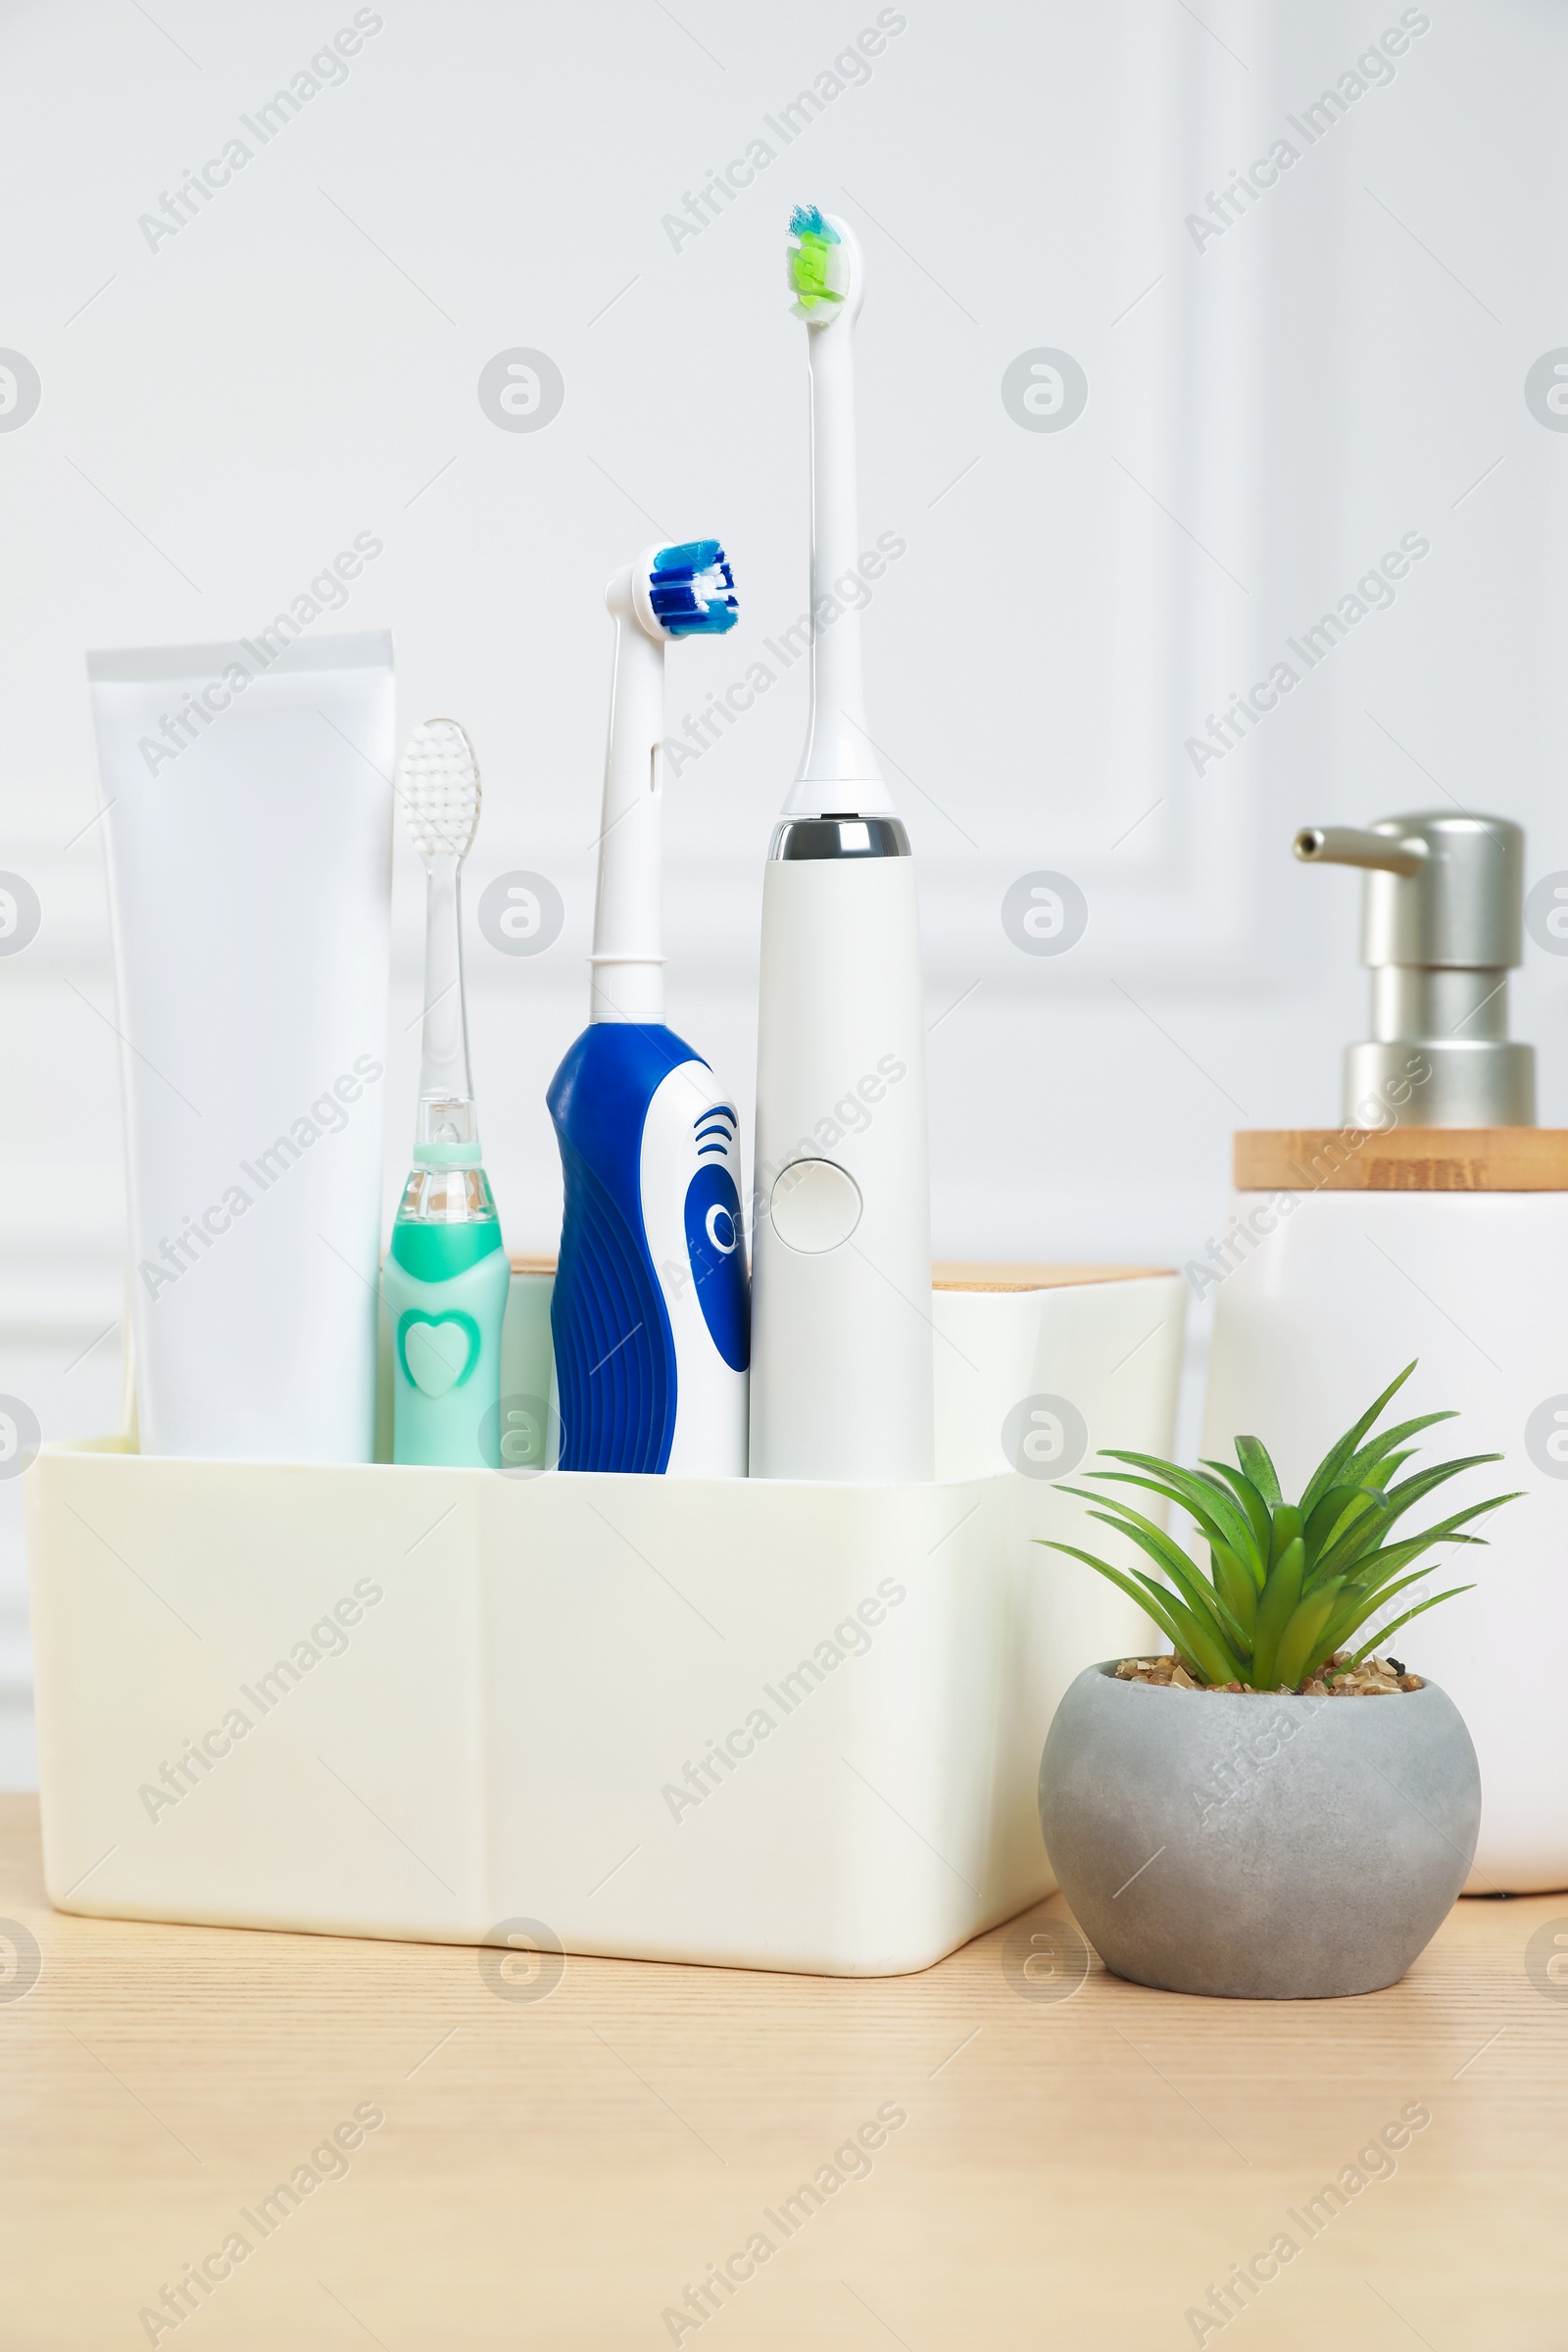 Photo of Electric toothbrushes and soap dispenser on wooden table